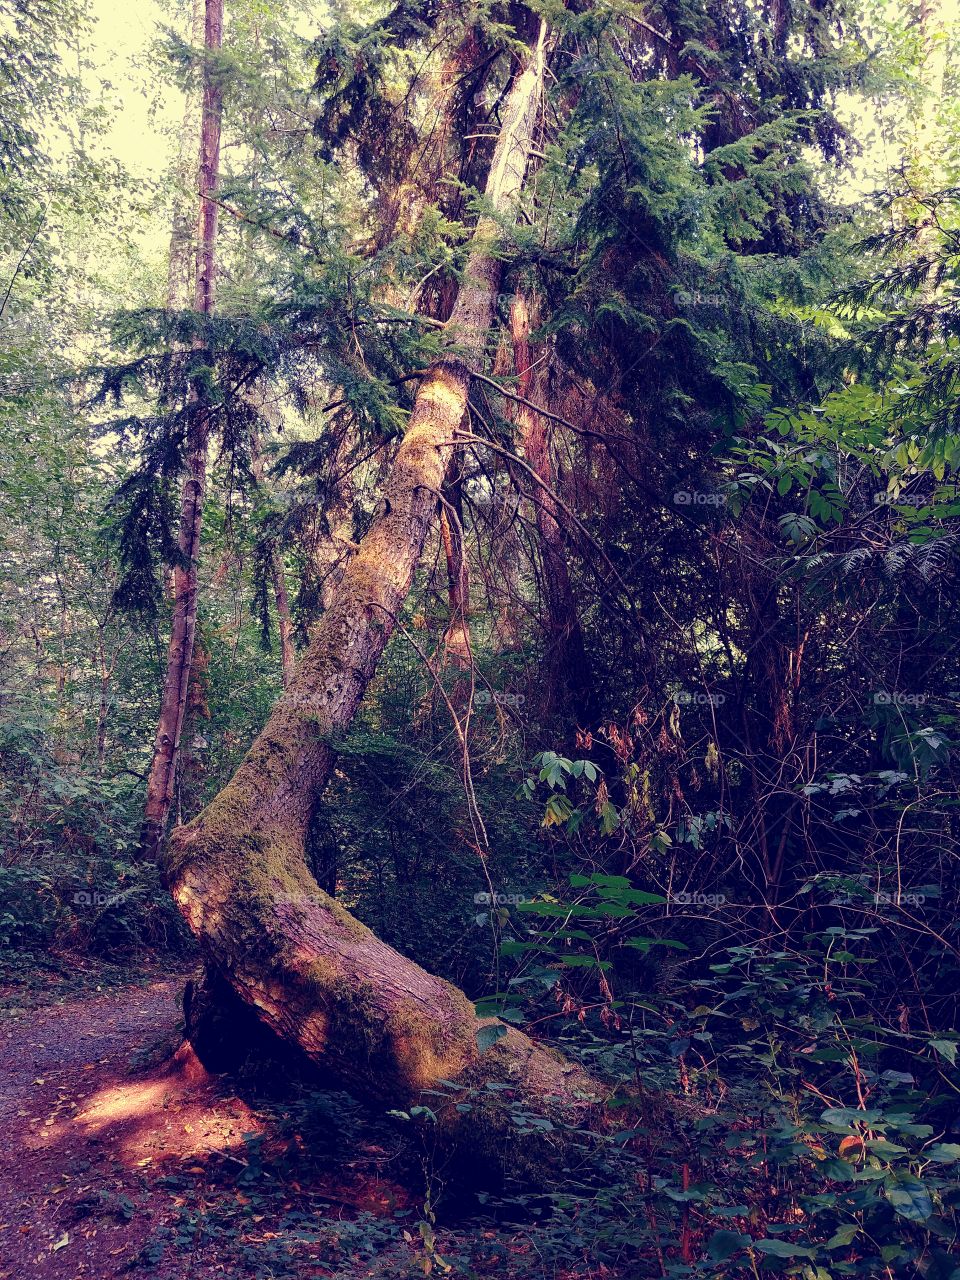 This tree bent itself out of the ground in a really awesome way.